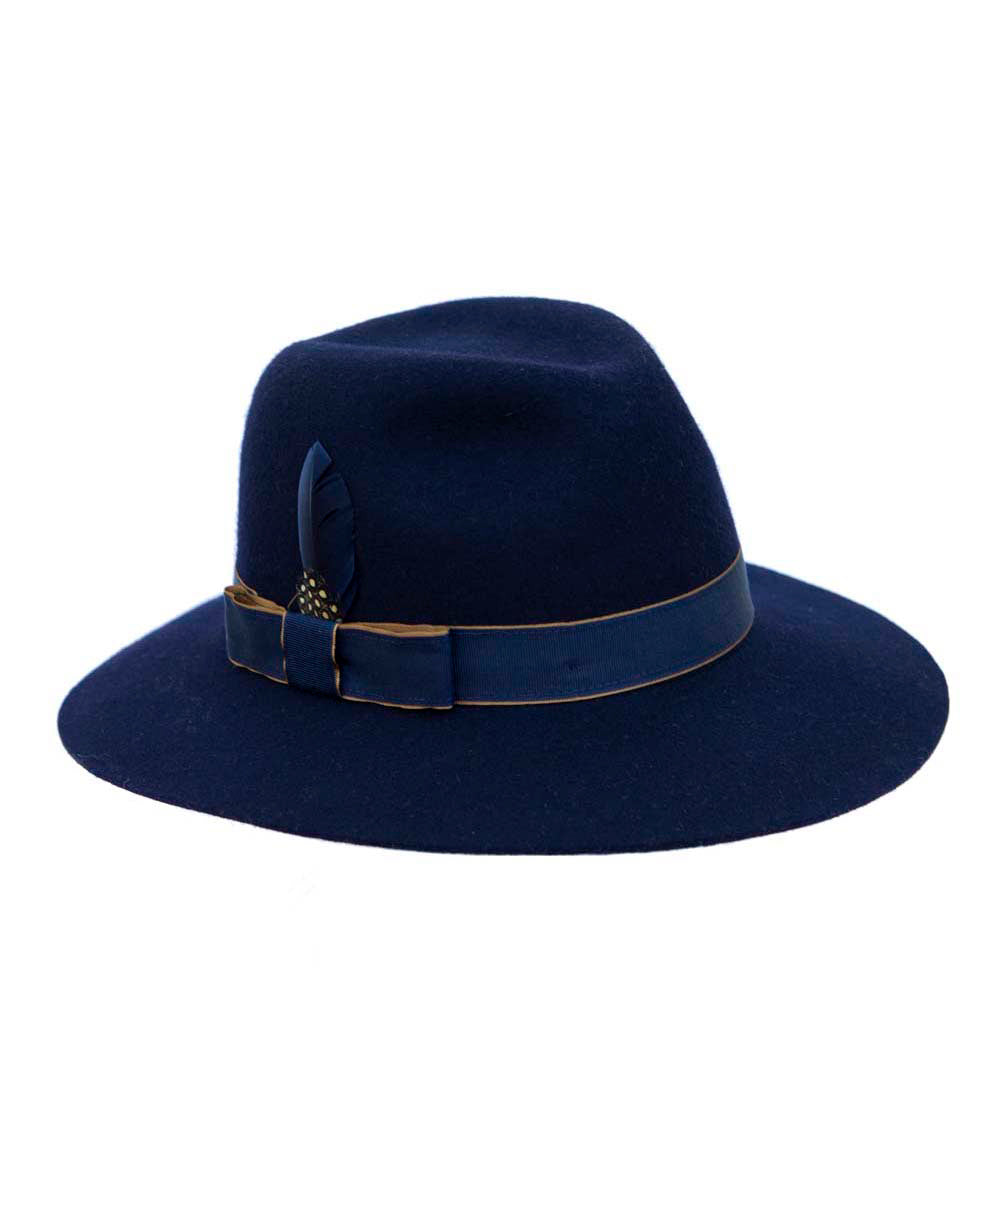 Goodwood Grayson Ladies Hat in Navy with Tan & Navy Ribbon and Blue Feather